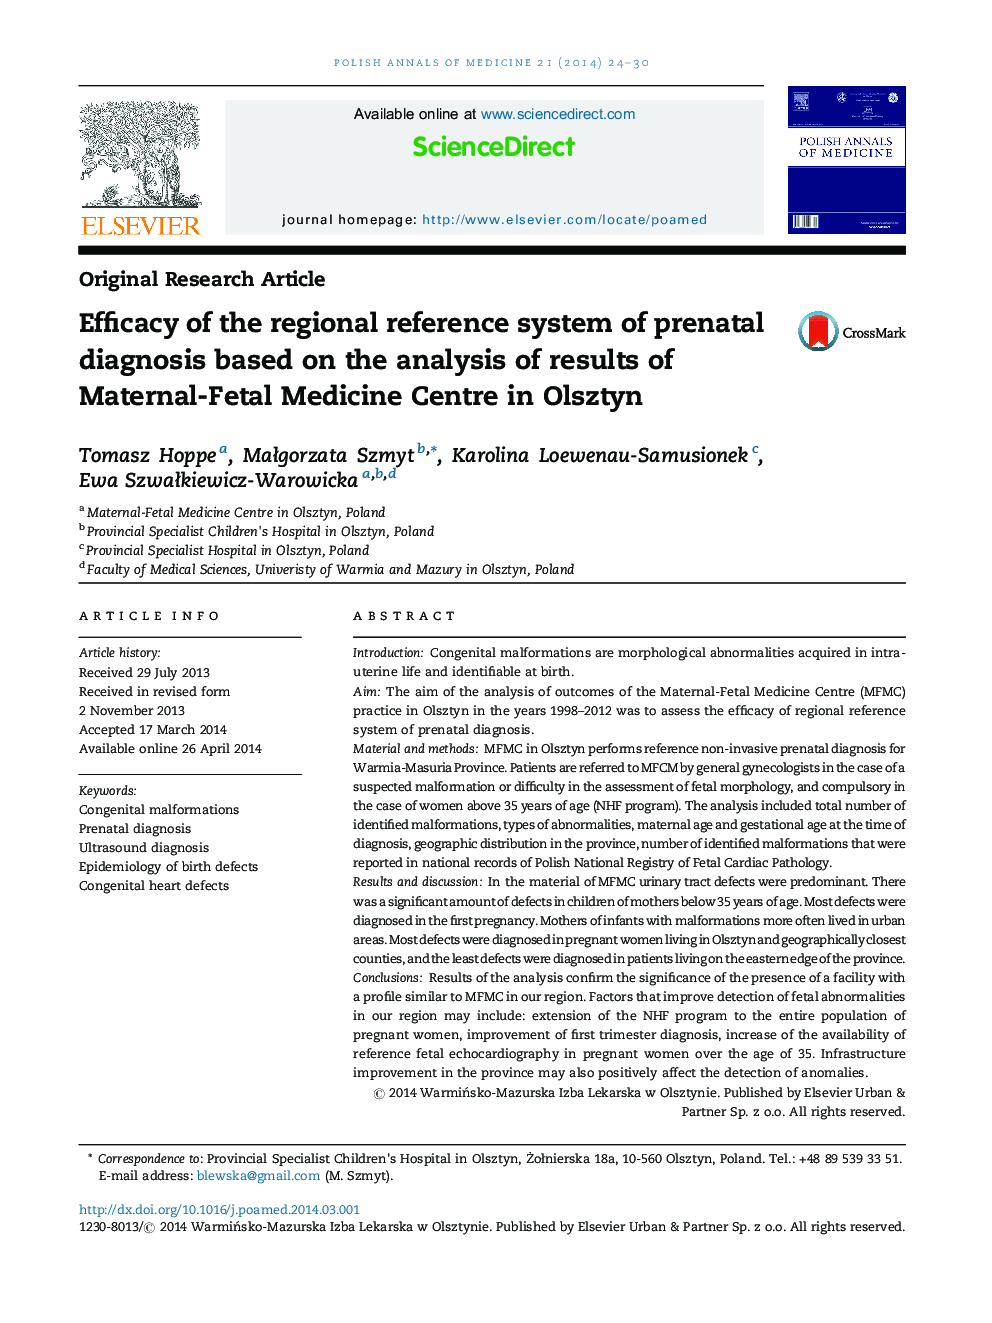 Efficacy of the regional reference system of prenatal diagnosis based on the analysis of results of Maternal-Fetal Medicine Centre in Olsztyn